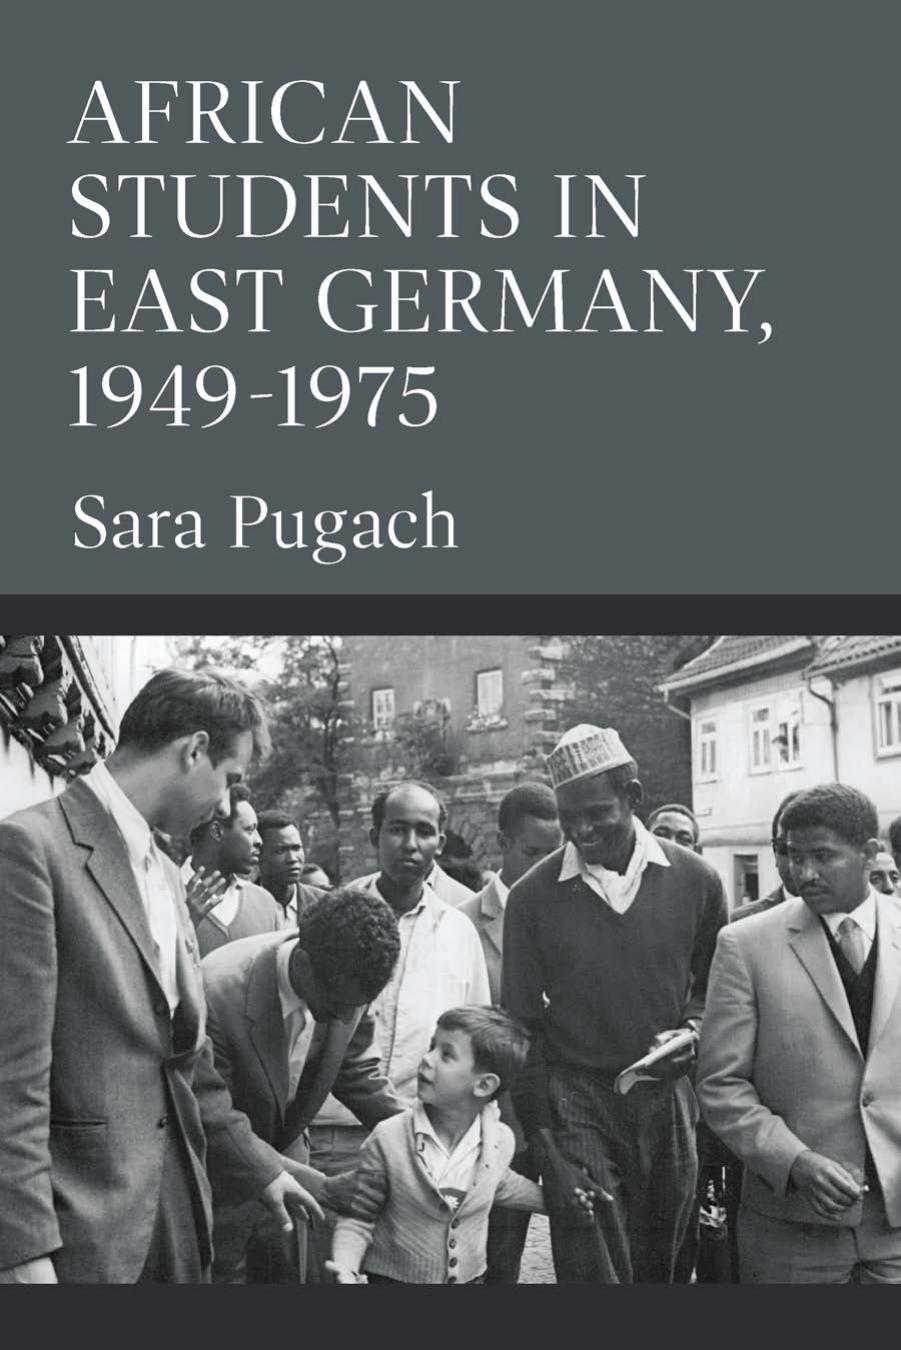 African Students in East Germany, 1949-1975 by Sara Pugach